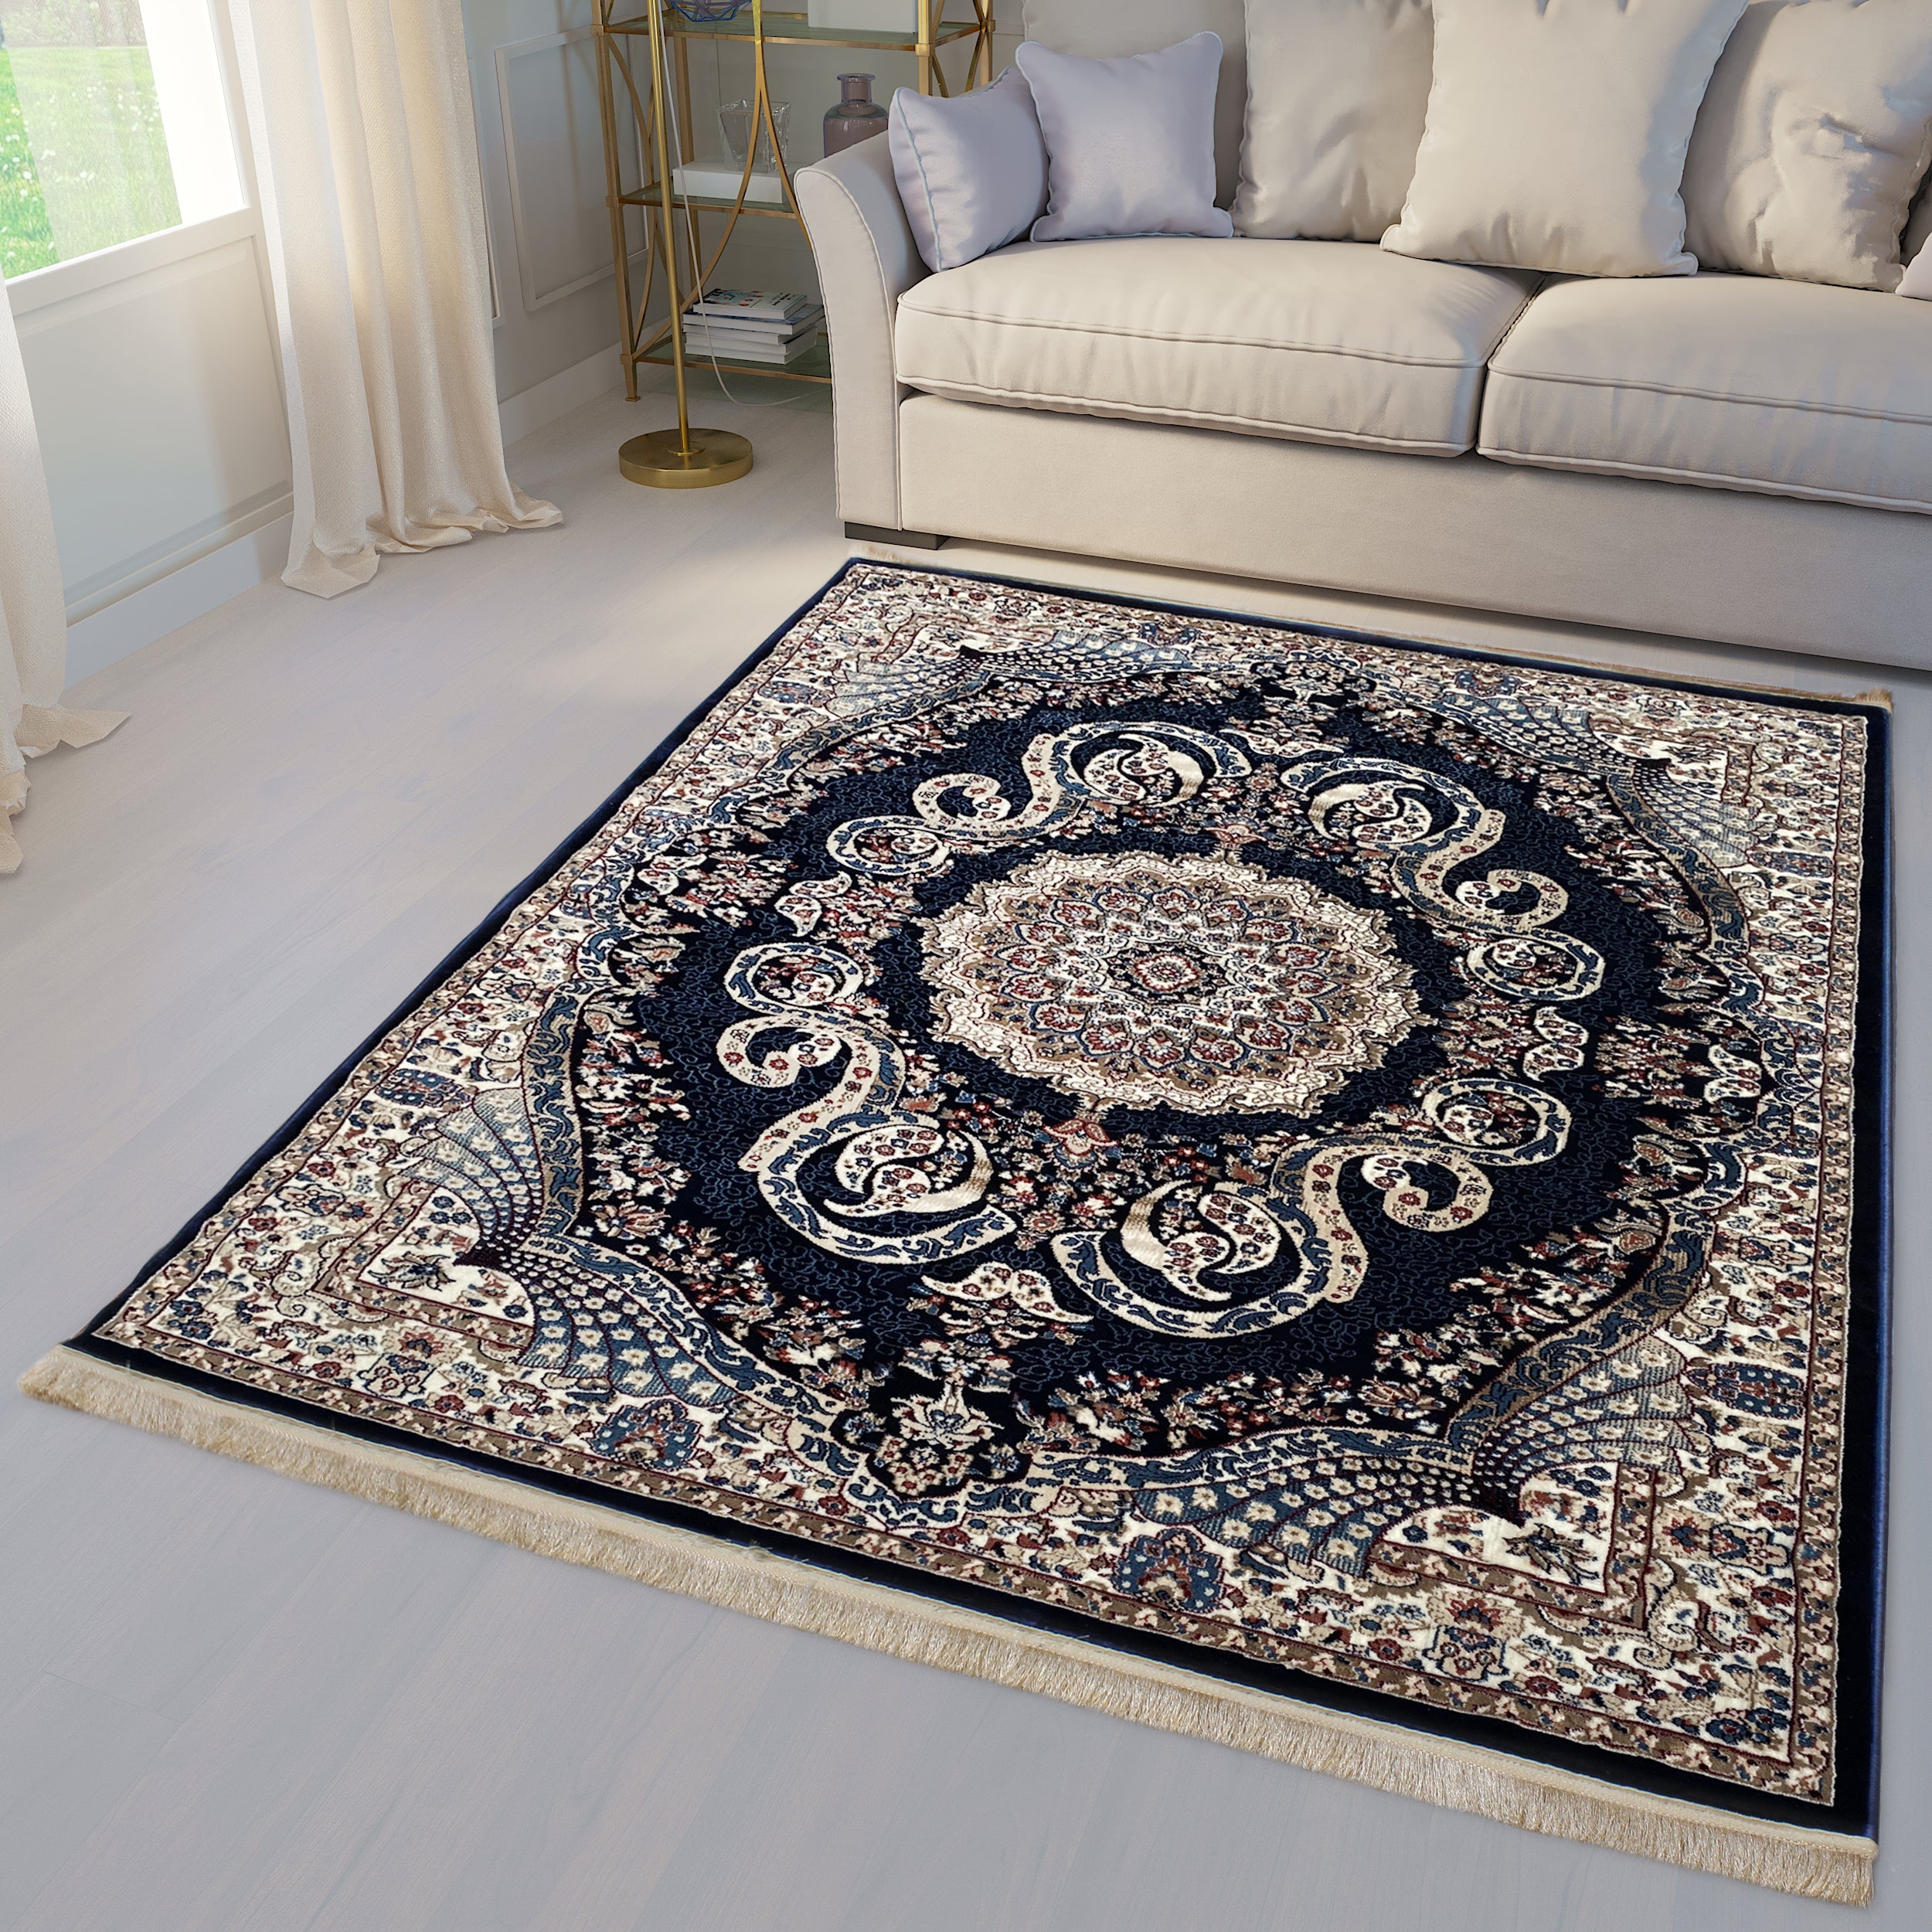 Traditional Navy Blue Vintage Area Rug, Brand: RugBerry, Collection: Kashan, Shape: Rectangular, Style: Tassel, Pattern: Vintage, Persian, Size: 5 x 7 ft, 8 x 10 ft, 9 x 12, Color: Navy Blue, Material: 100% Polyester Silk, Weave: Machine Made, Thickness: 0.5 inches, Room: Bedroom, Dining Room, Living Room, Hallway, Office, Kitchen, Bathroom, Entryway, Nursery, Kids Room